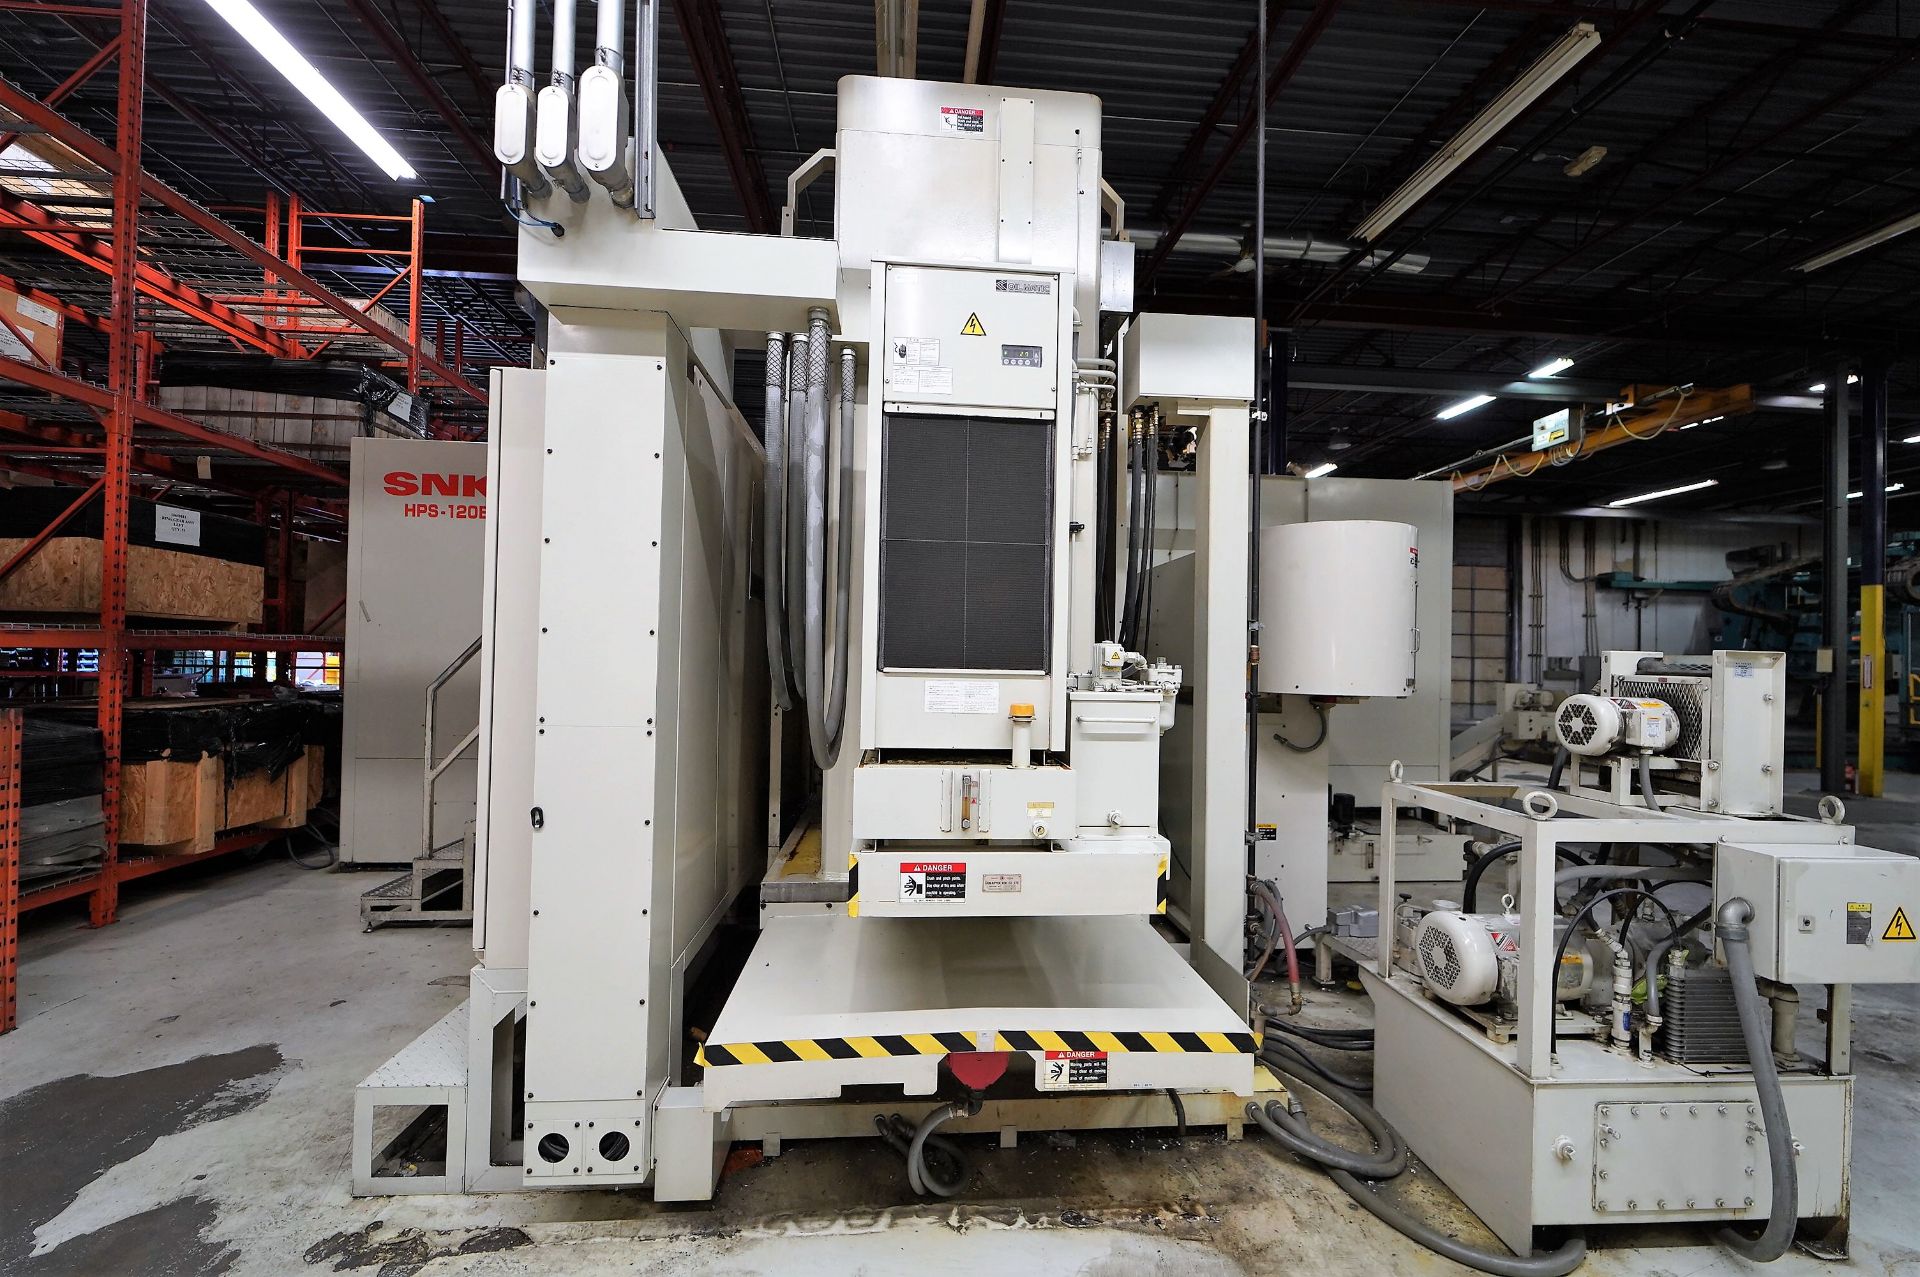 SNK HPS-120B 5-Axis CNC High Speed Aerospace Profiler & Machining Center With Pallet Changer - Image 17 of 20